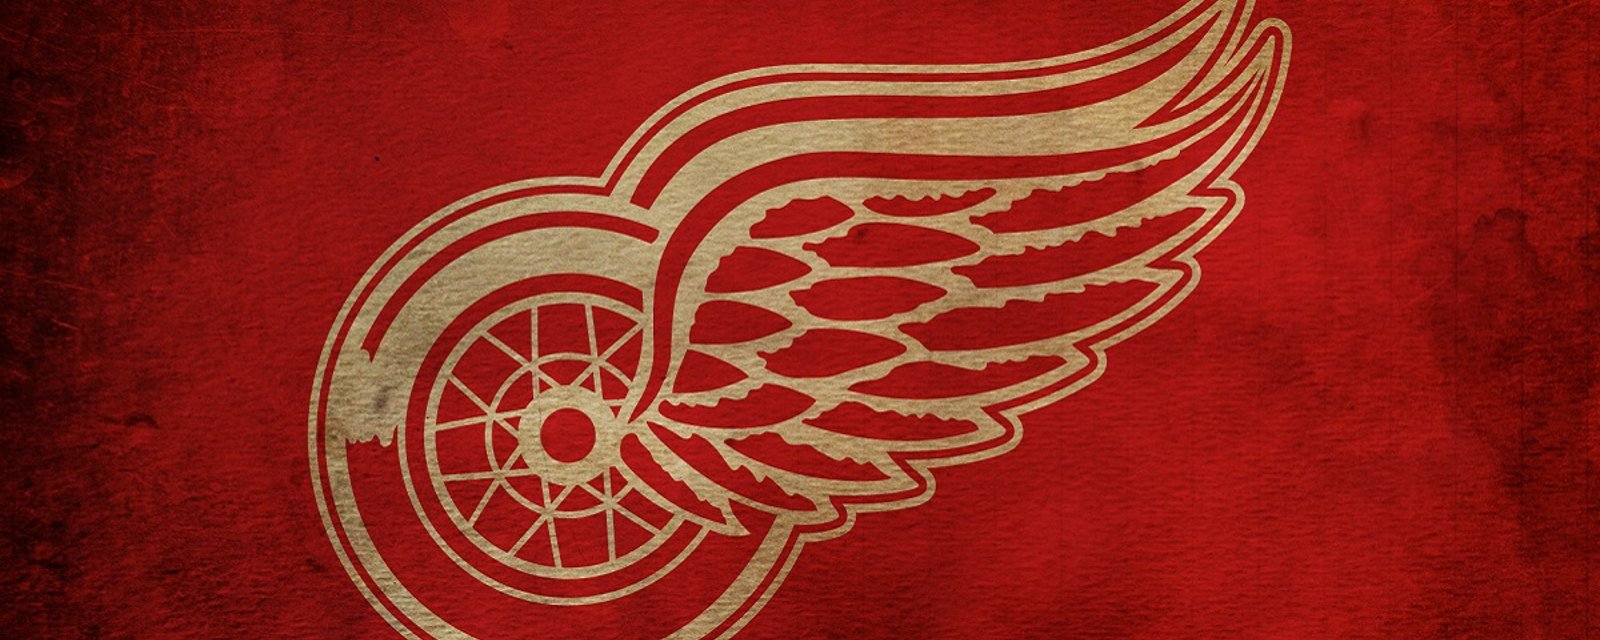 Breaking: Red Wings sign 21-year-old free agent forward.